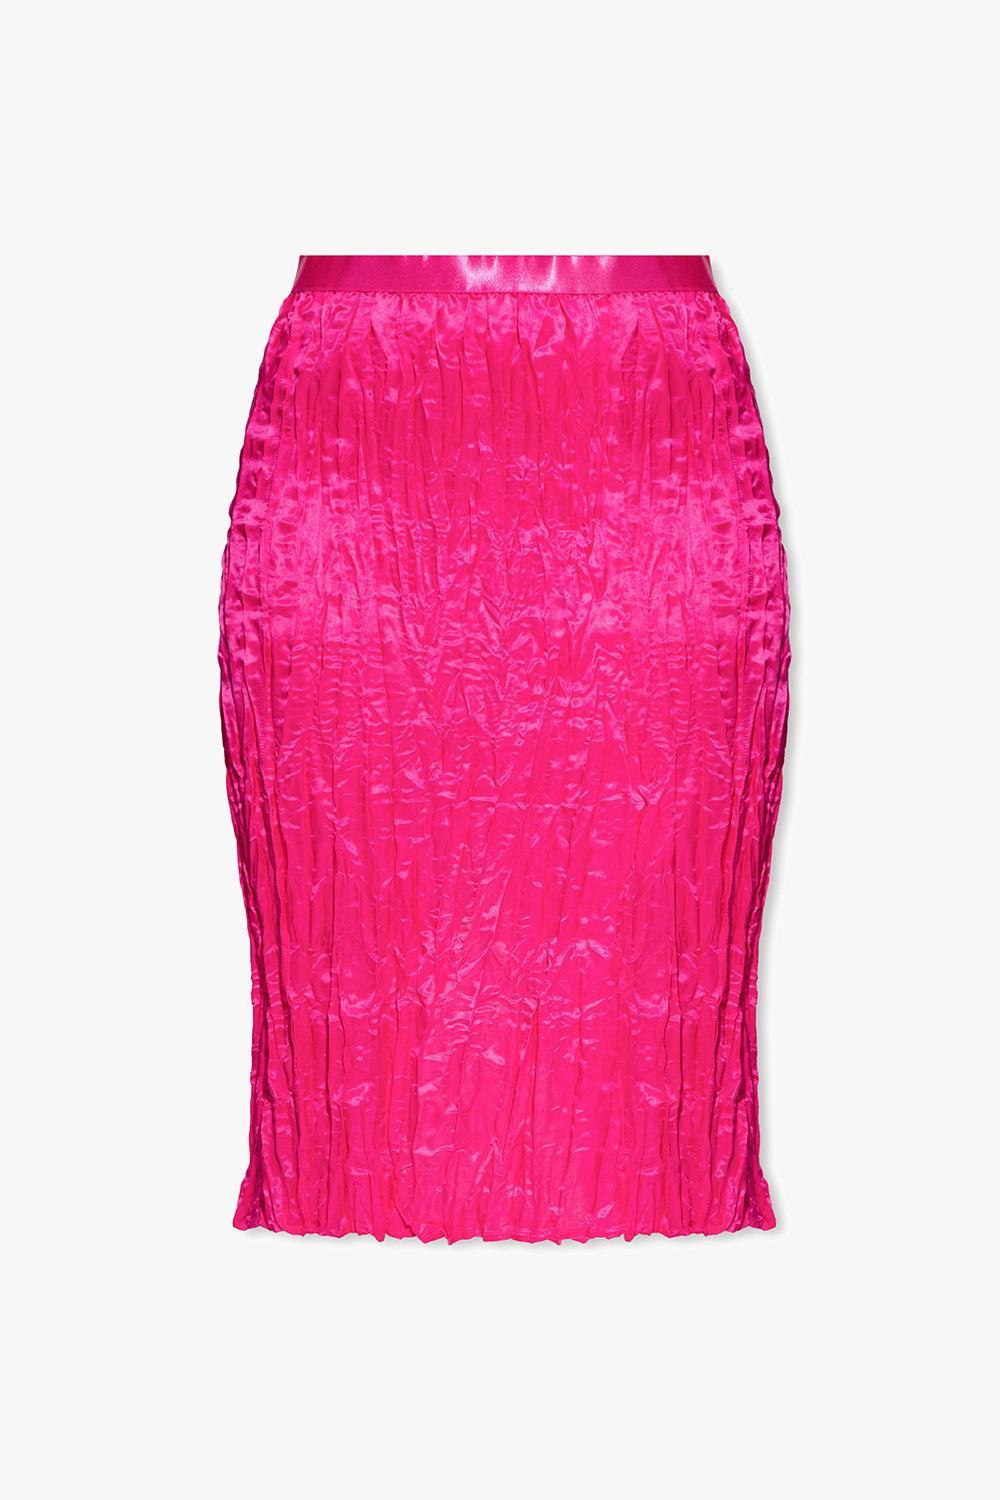 Acne Studios Pink Skirt With Gathers | Lyst